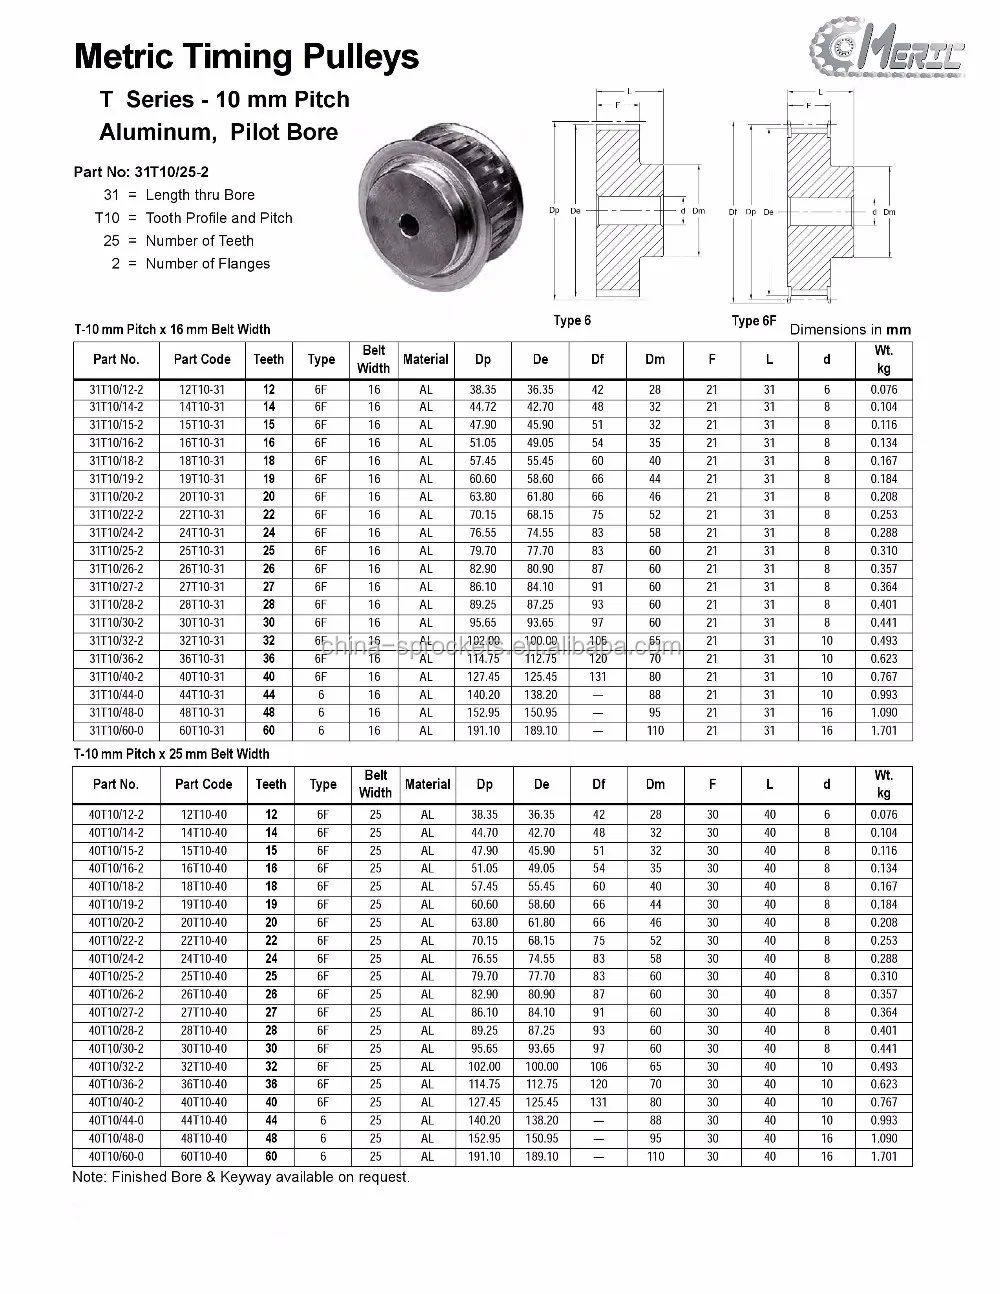 5m Htd 26t Pvc Timing Pulley - Buy Pvc Timing Pulley,Timing Pulleys,Htd ...